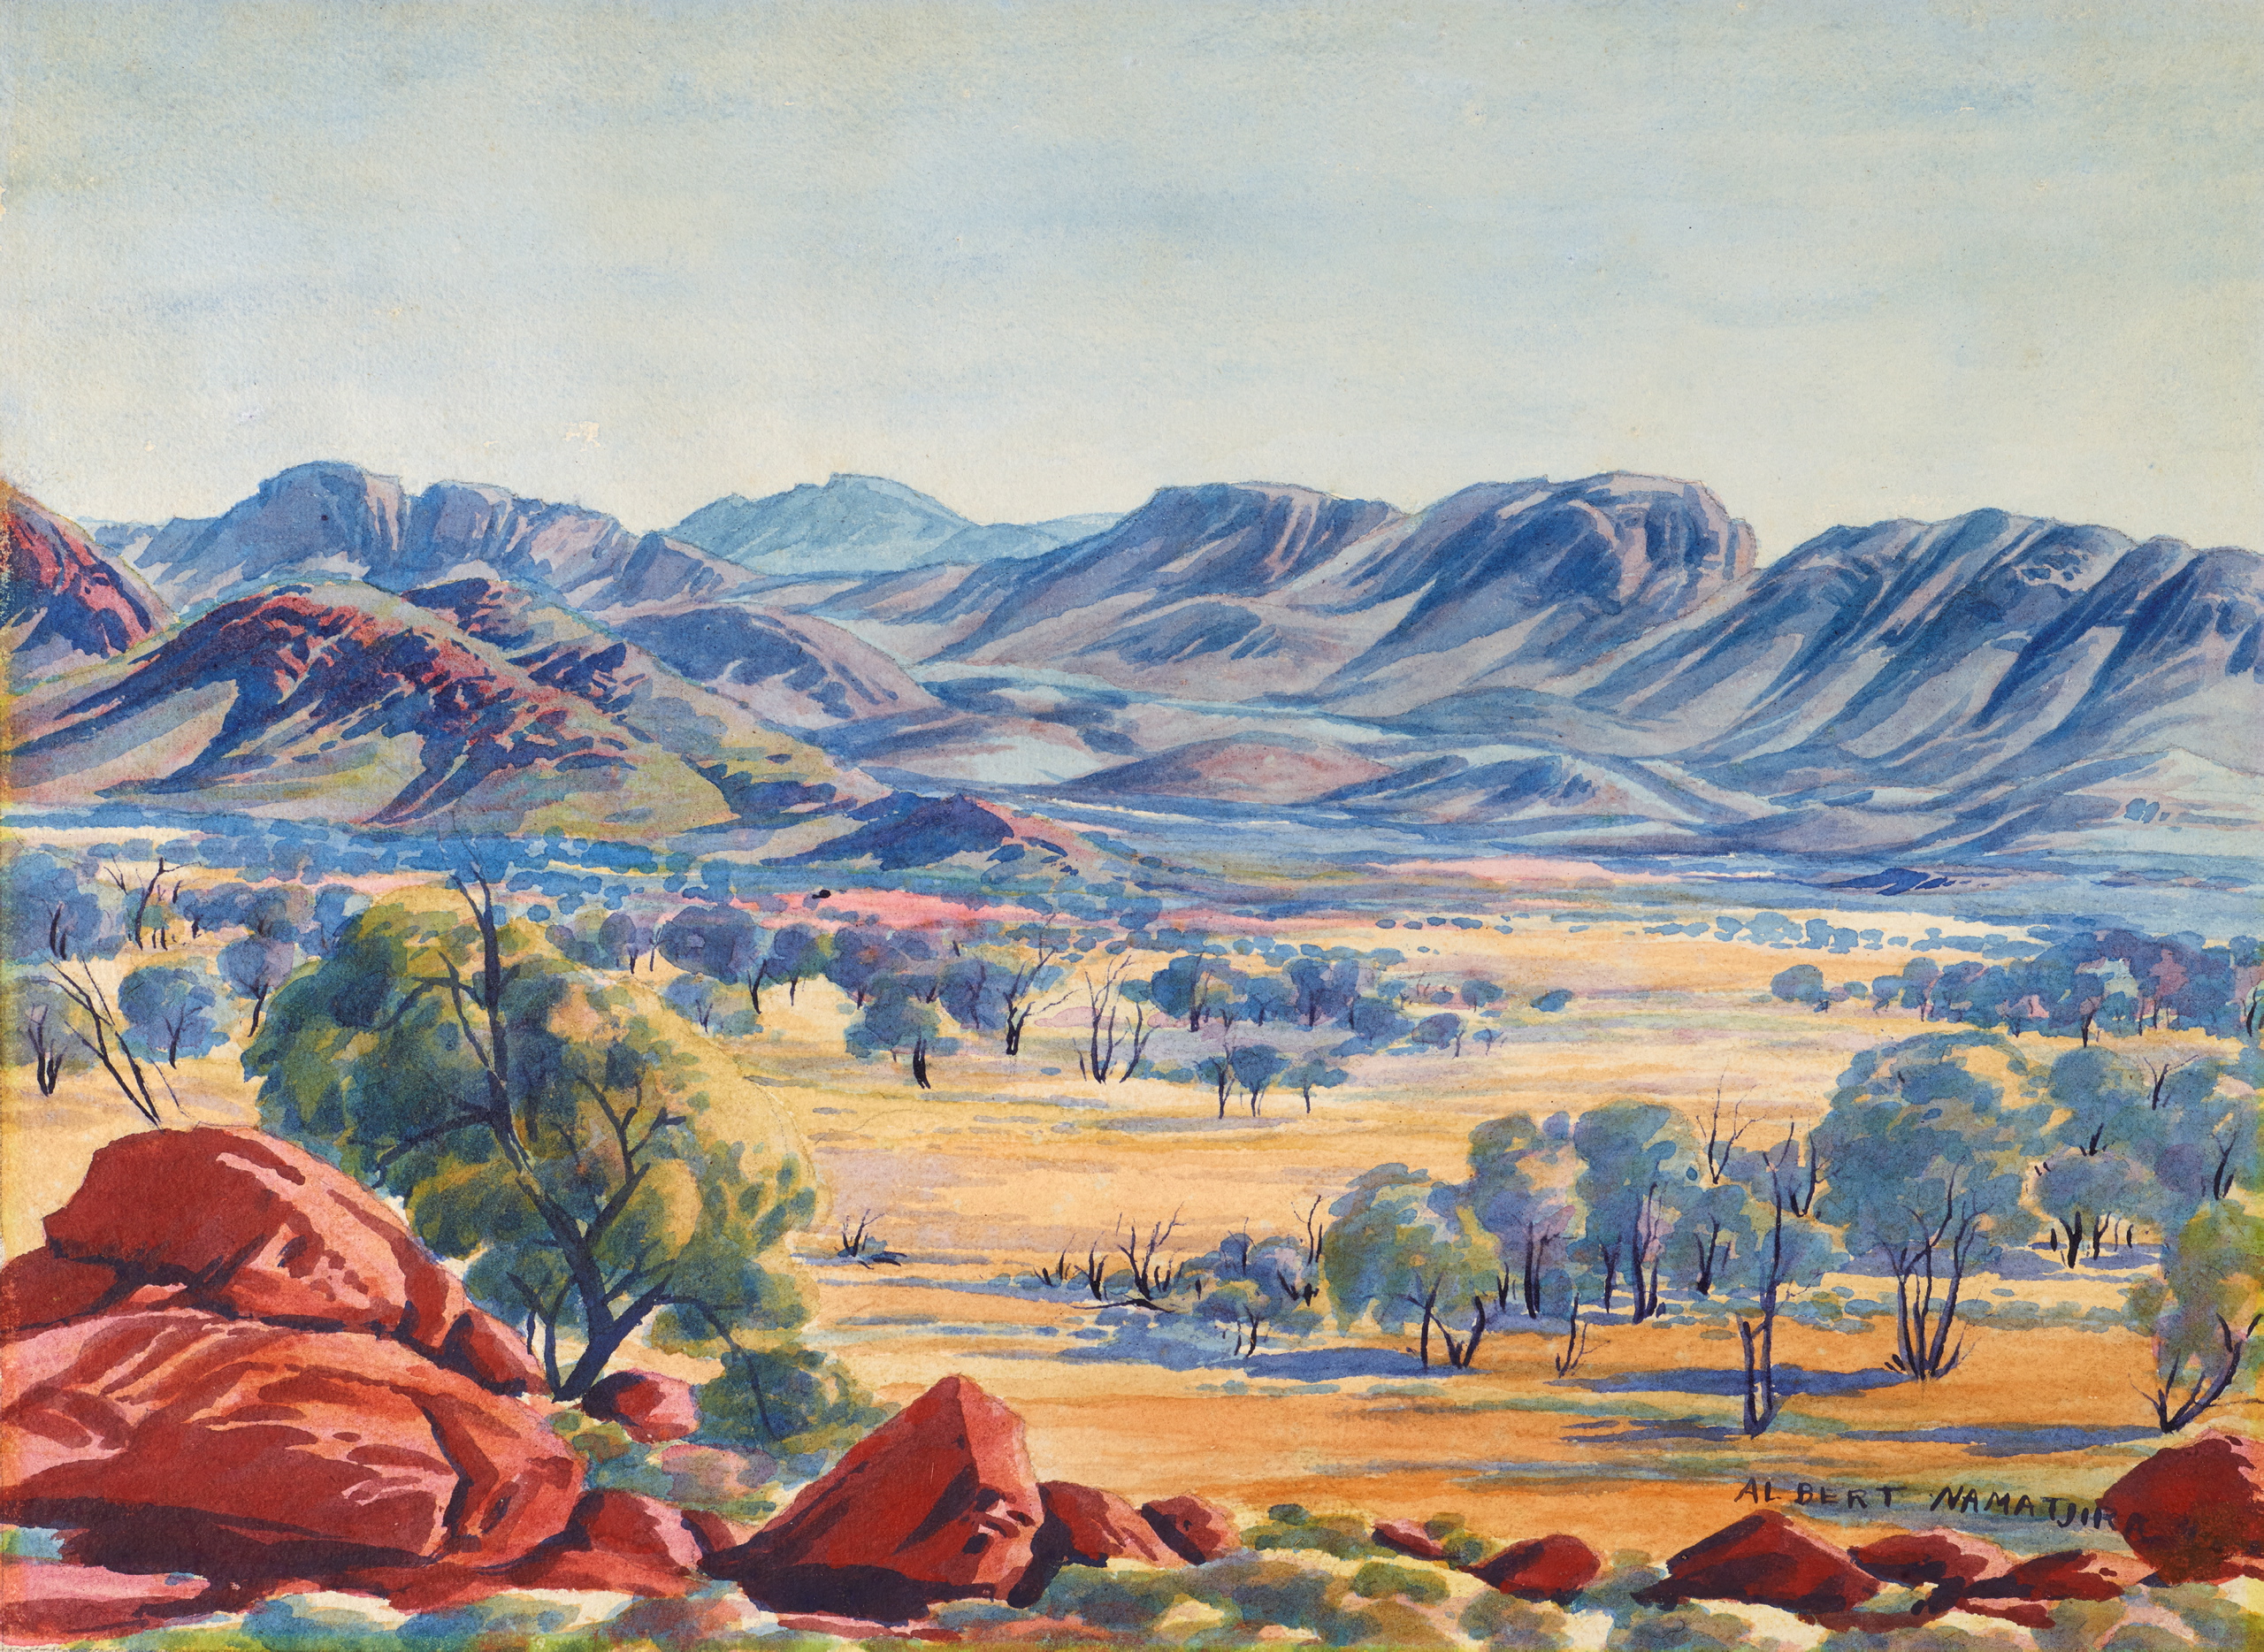 A canvas featuring a mountainous landscape painted in pastel blues and yellow, dotted with green gum trees and red earthy rocks.